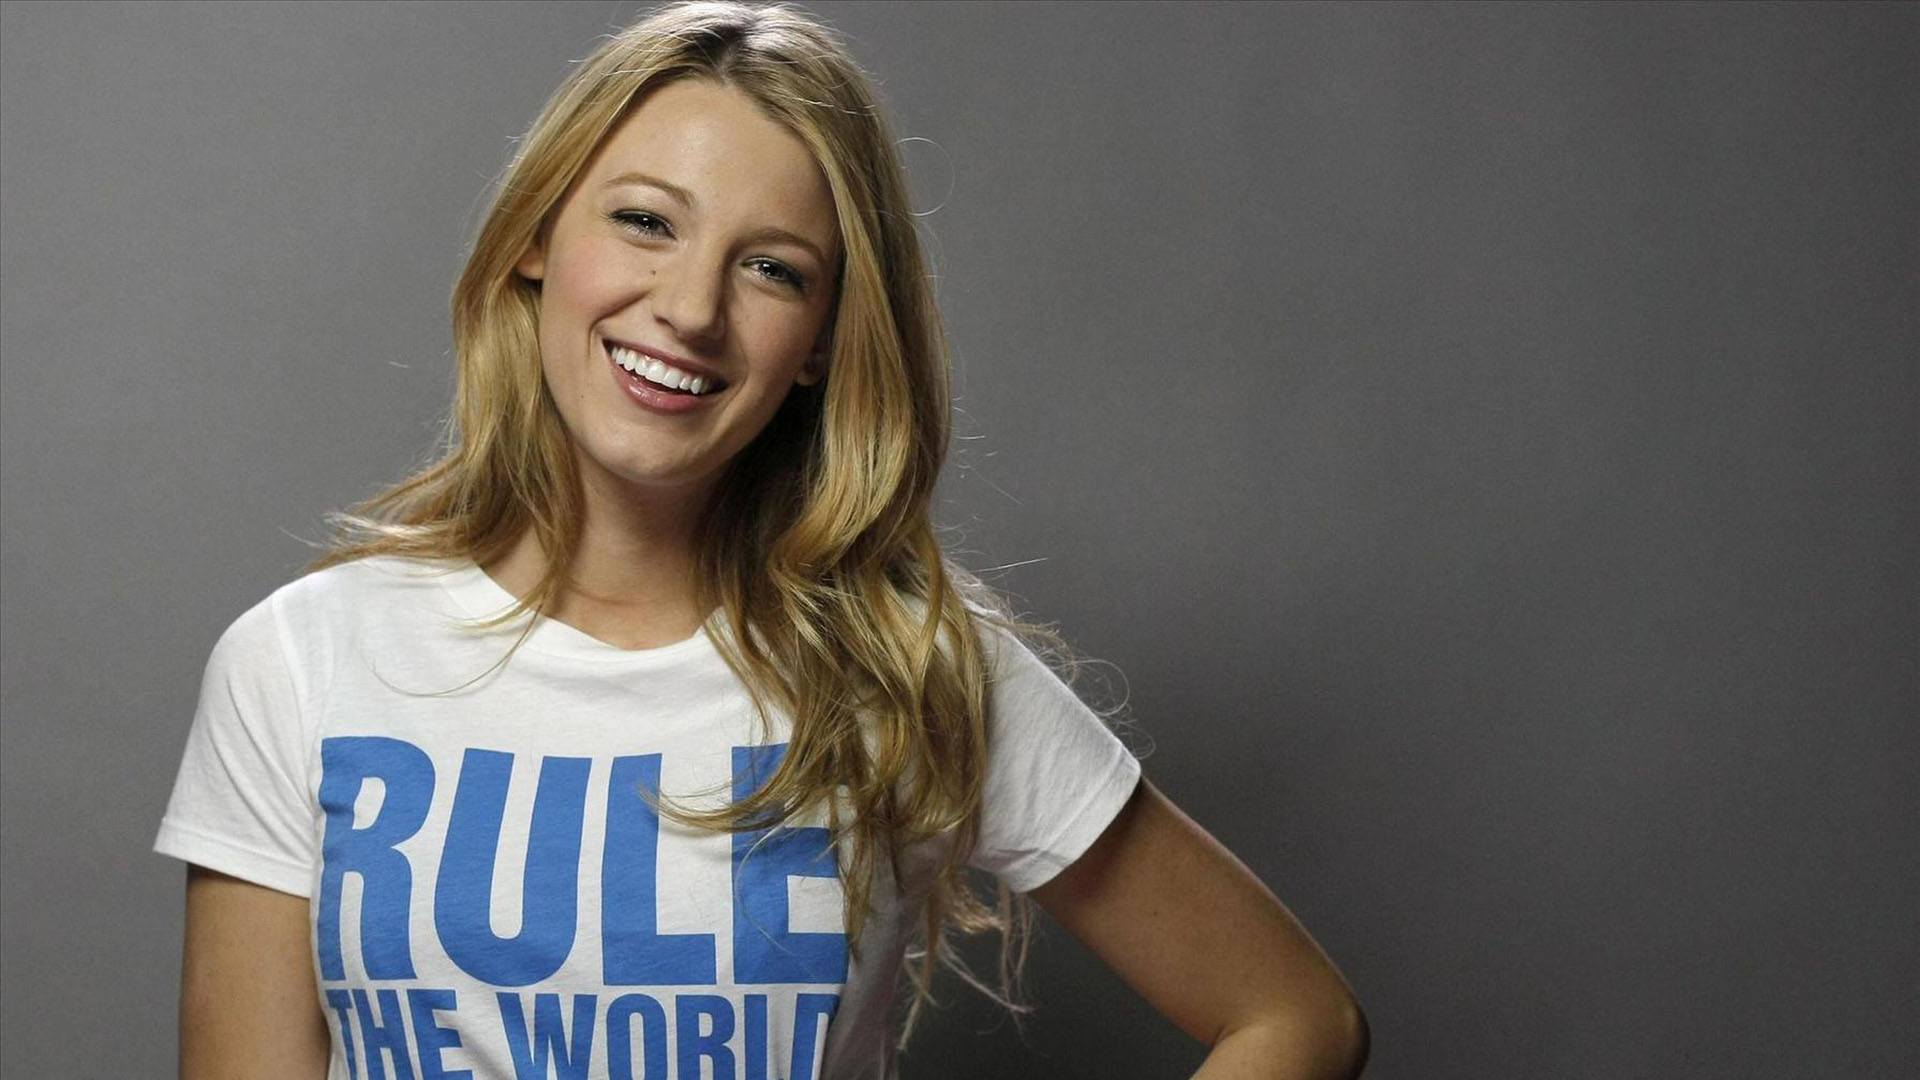 Blake Lively Is Wearing T-shirt With Loose Hair With Cute Smile 2K Celebrities